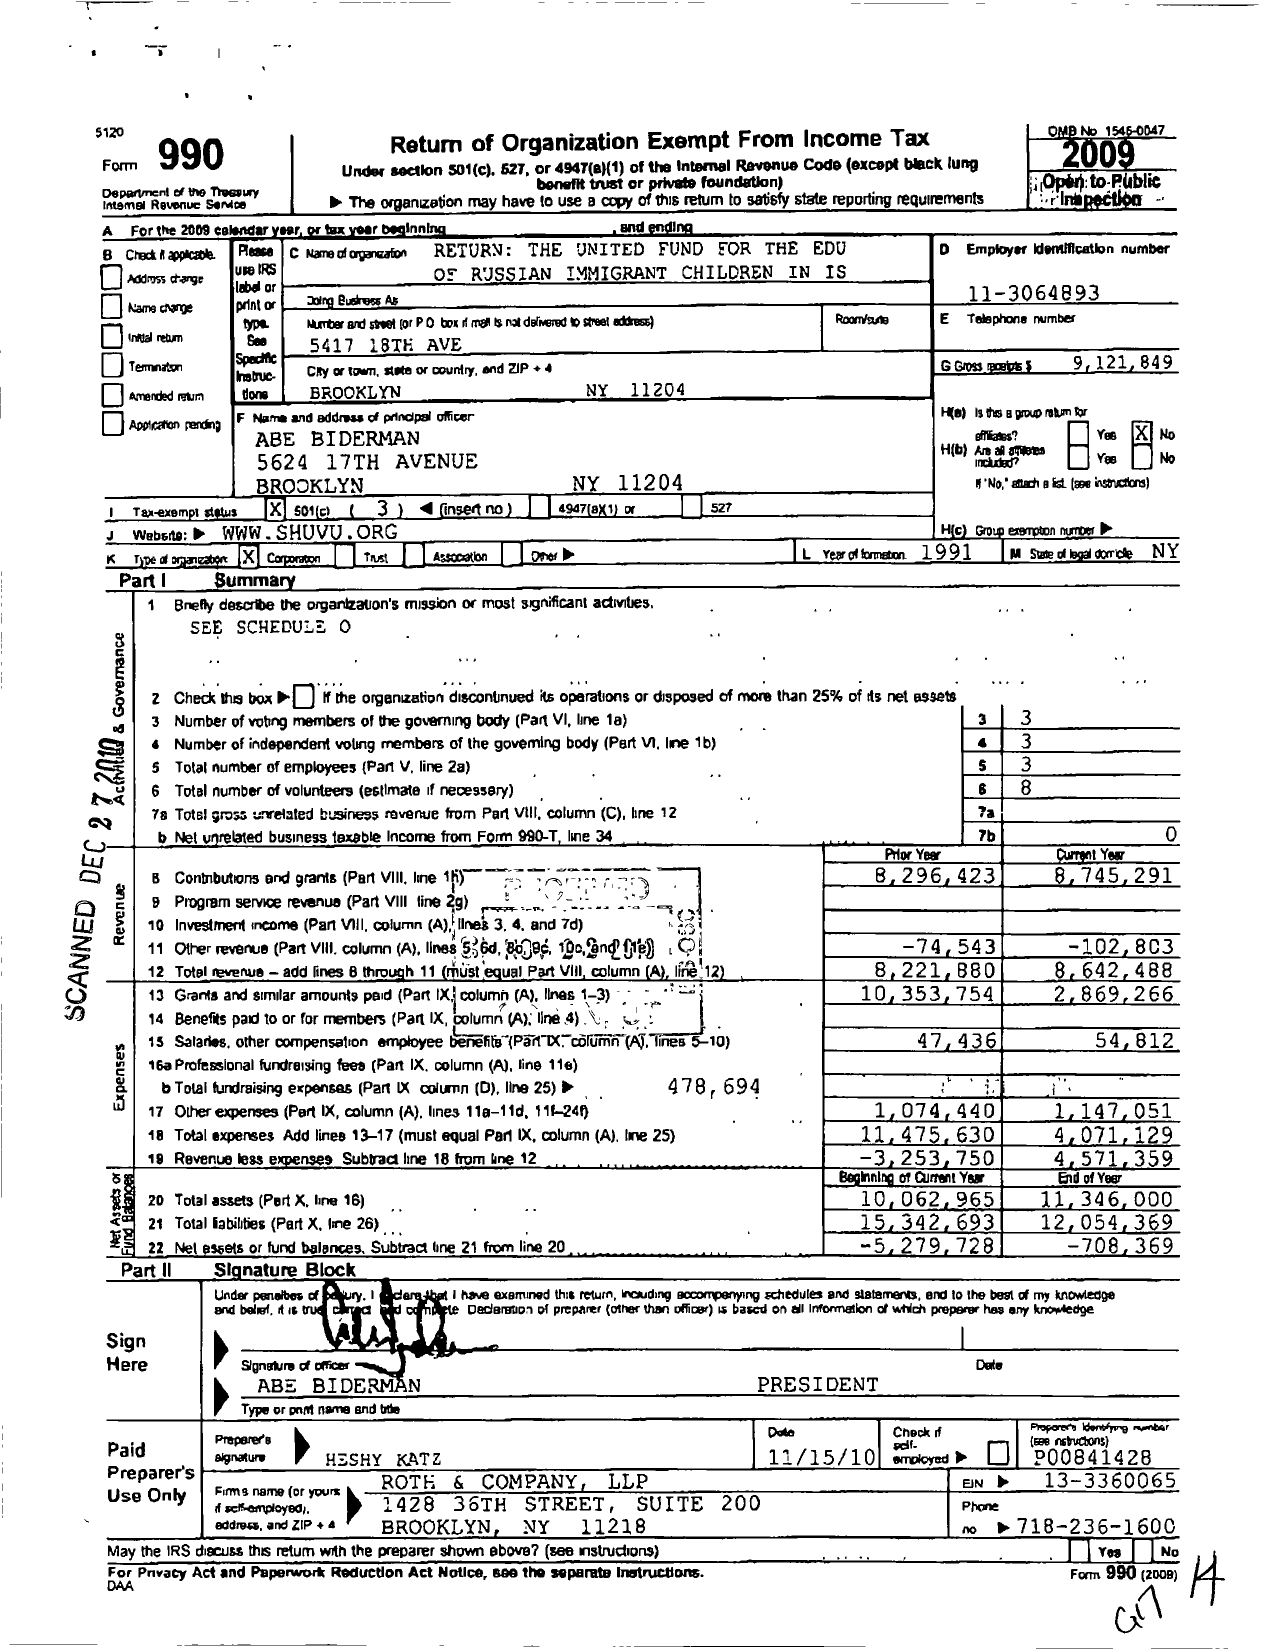 Image of first page of 2009 Form 990 for Return the United Fund for the Edu of Russian Immigrant Children in Is